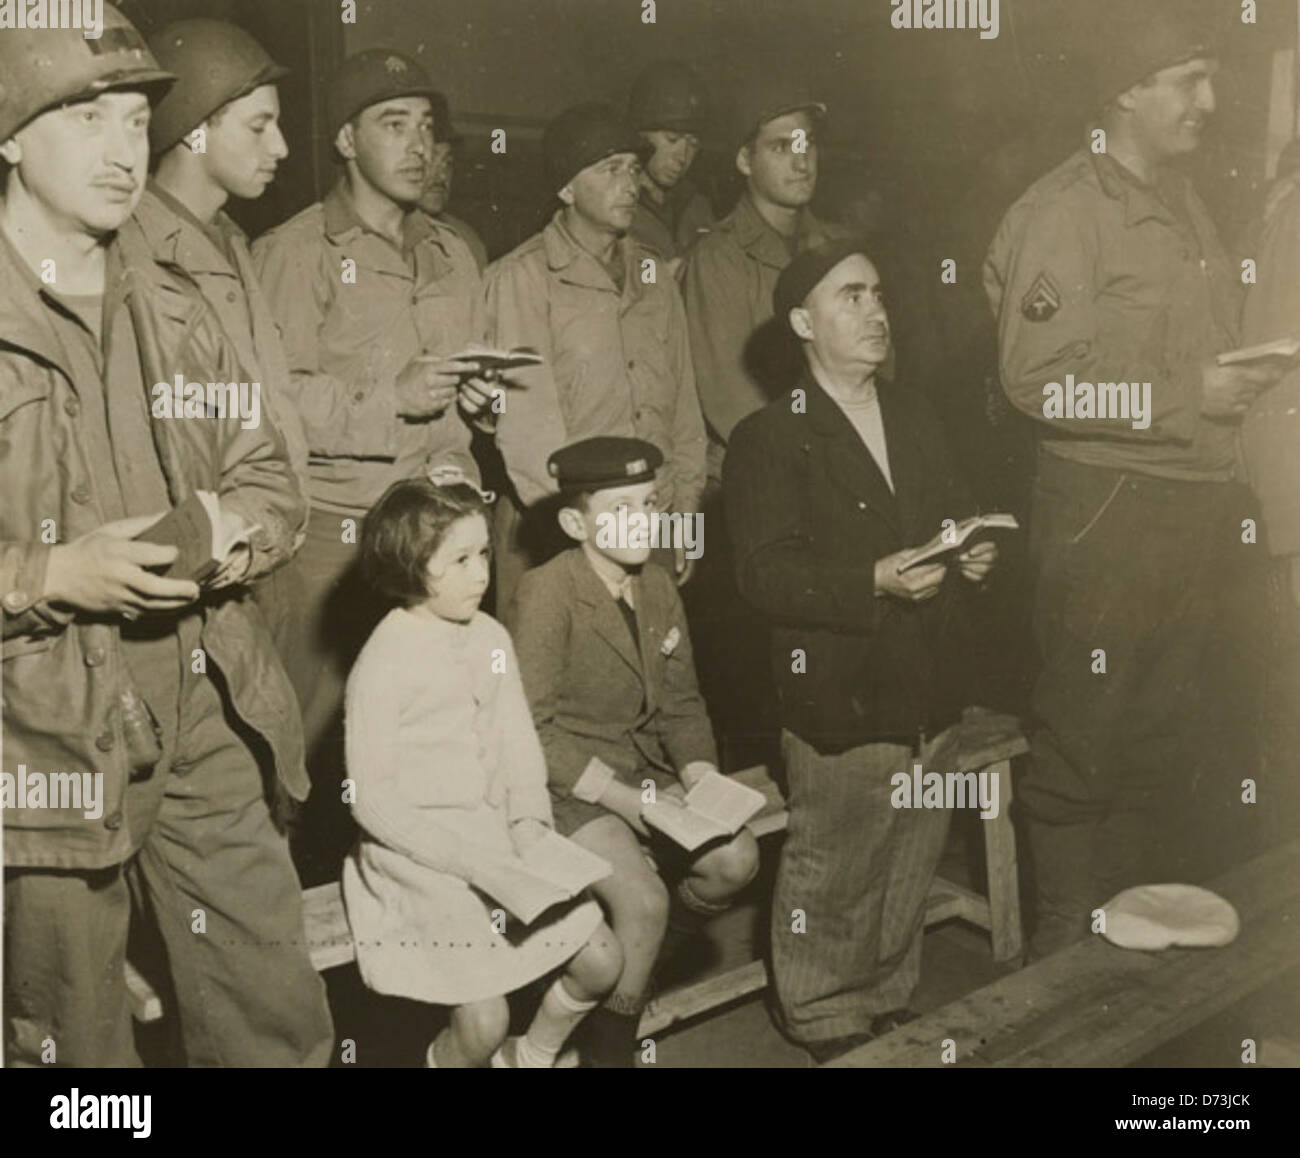 Chaplain Manuel M. Poliakoff had three unexpected guests..., March 9, 1945 Stock Photo